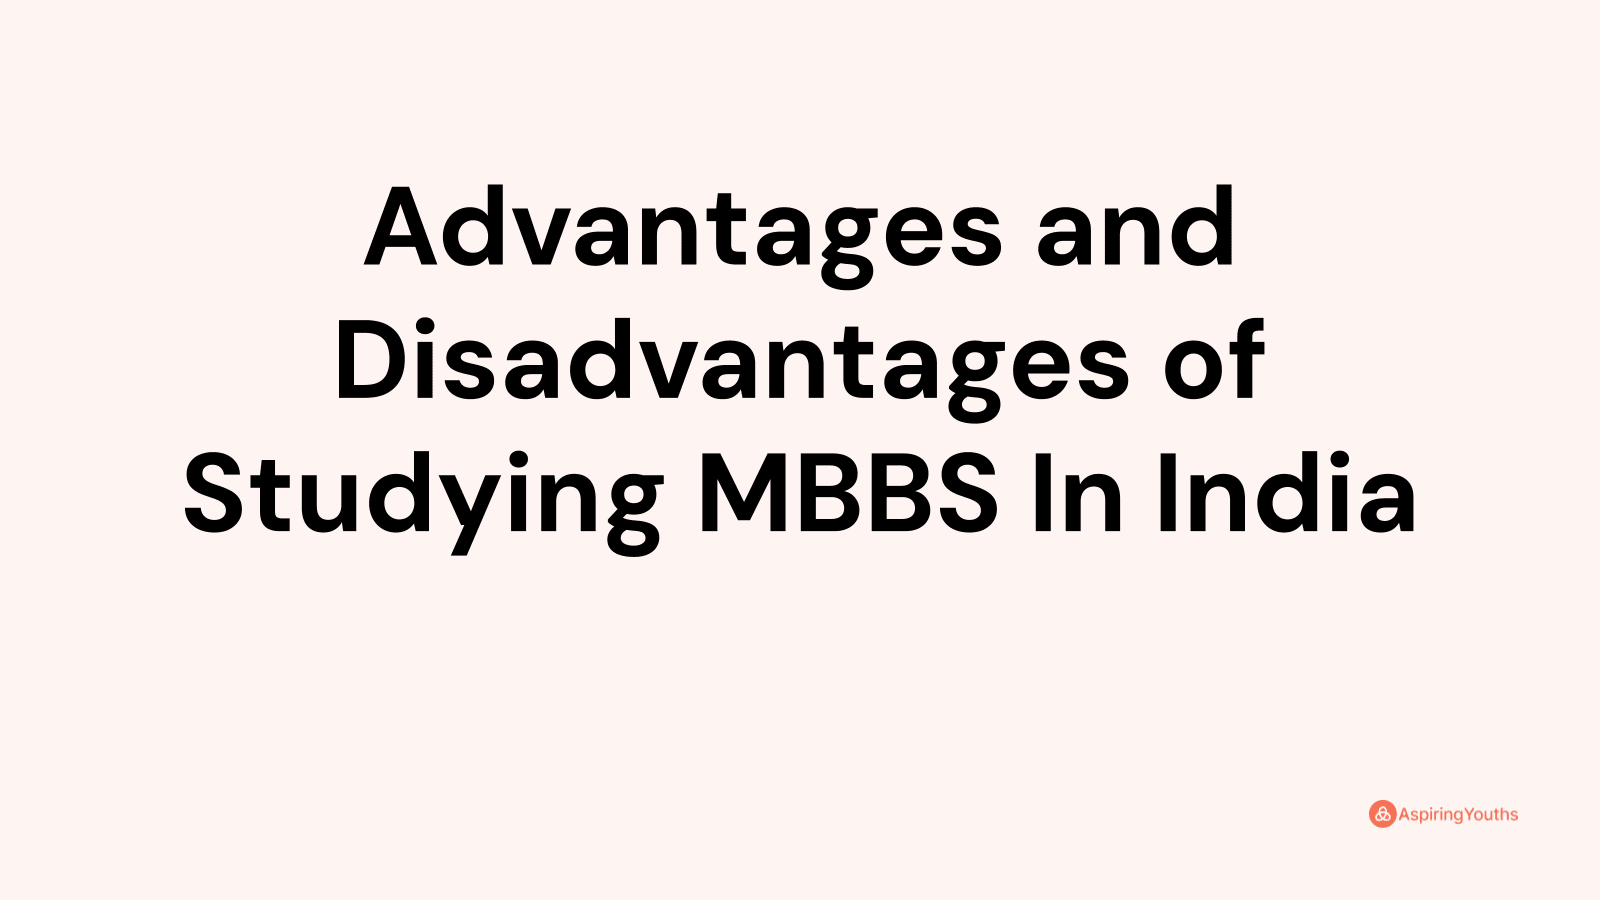 Advantages and disadvantages of Studying MBBS In India